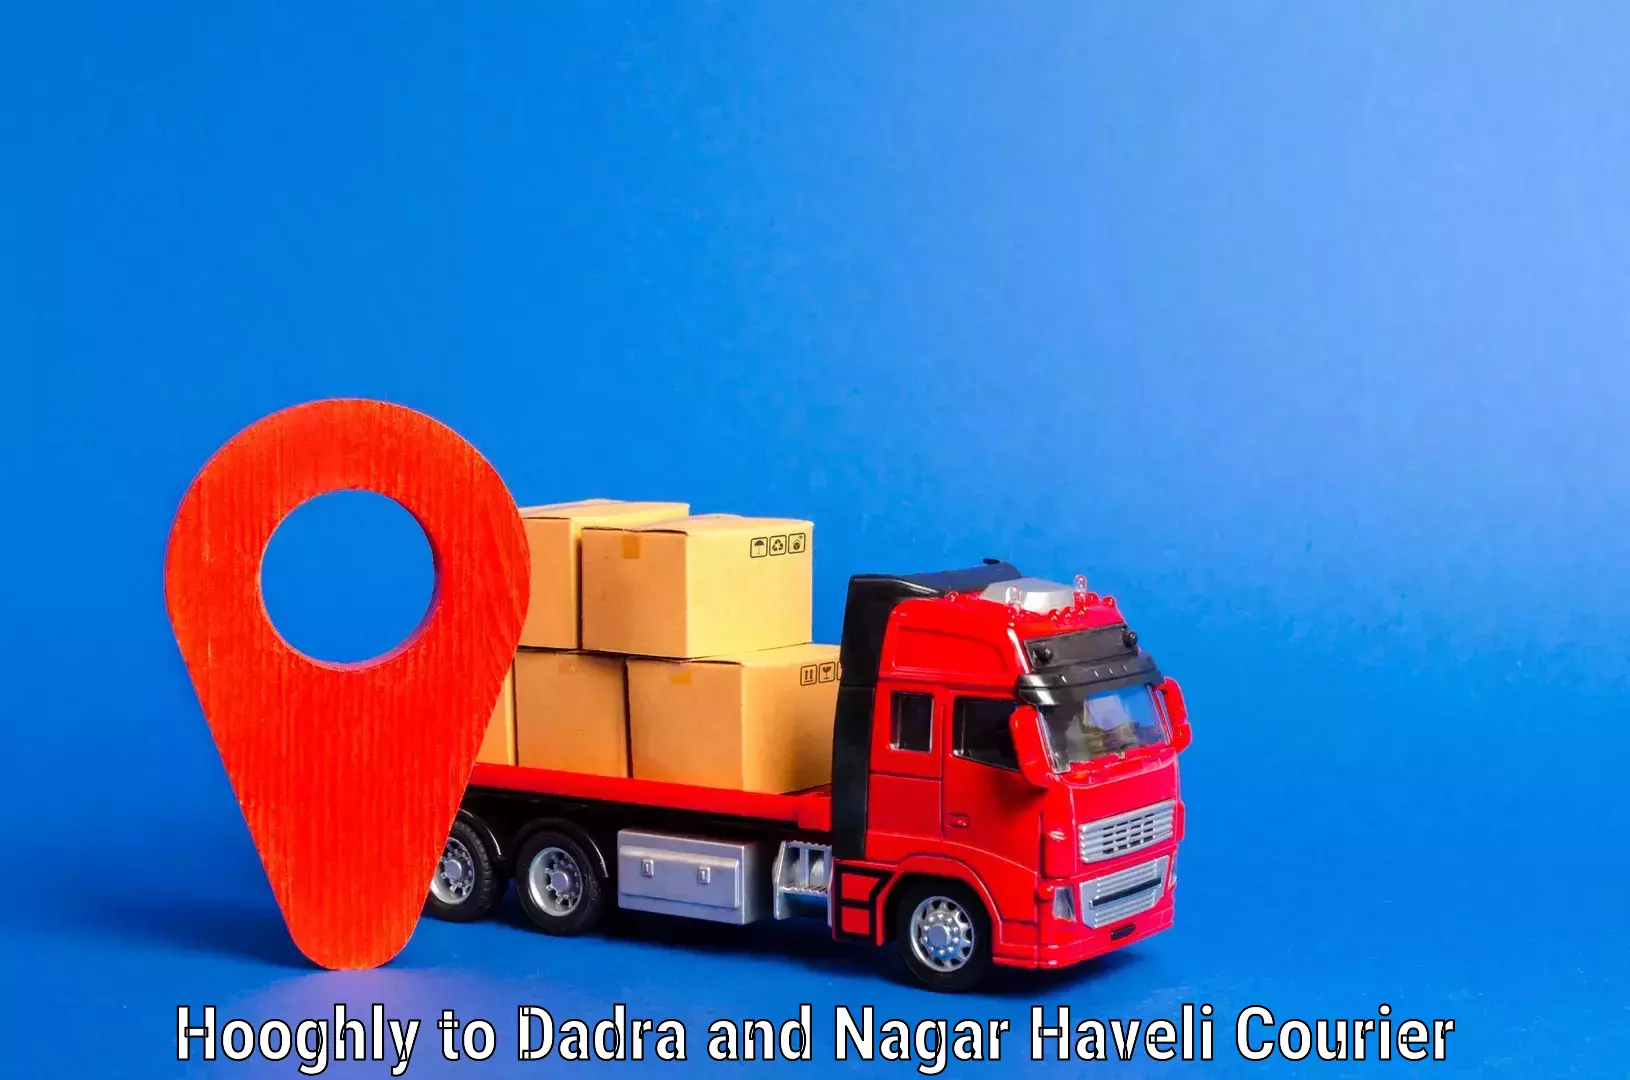 Furniture delivery service Hooghly to Dadra and Nagar Haveli